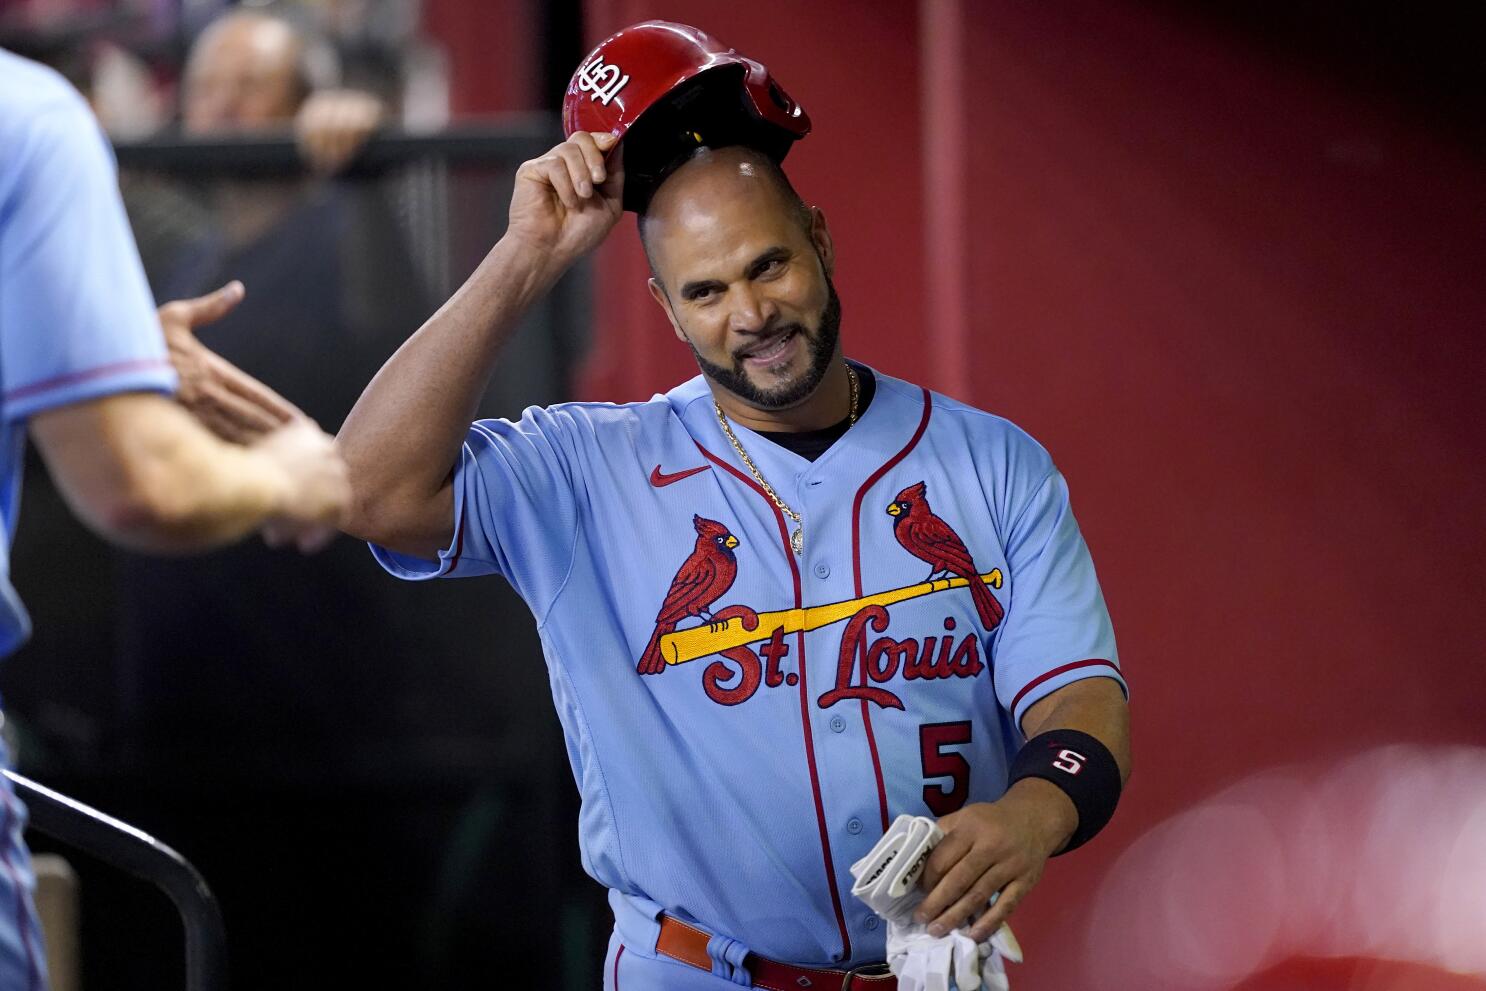 MLB makes right call by adding Pujols, Cabrera to All-Star Game